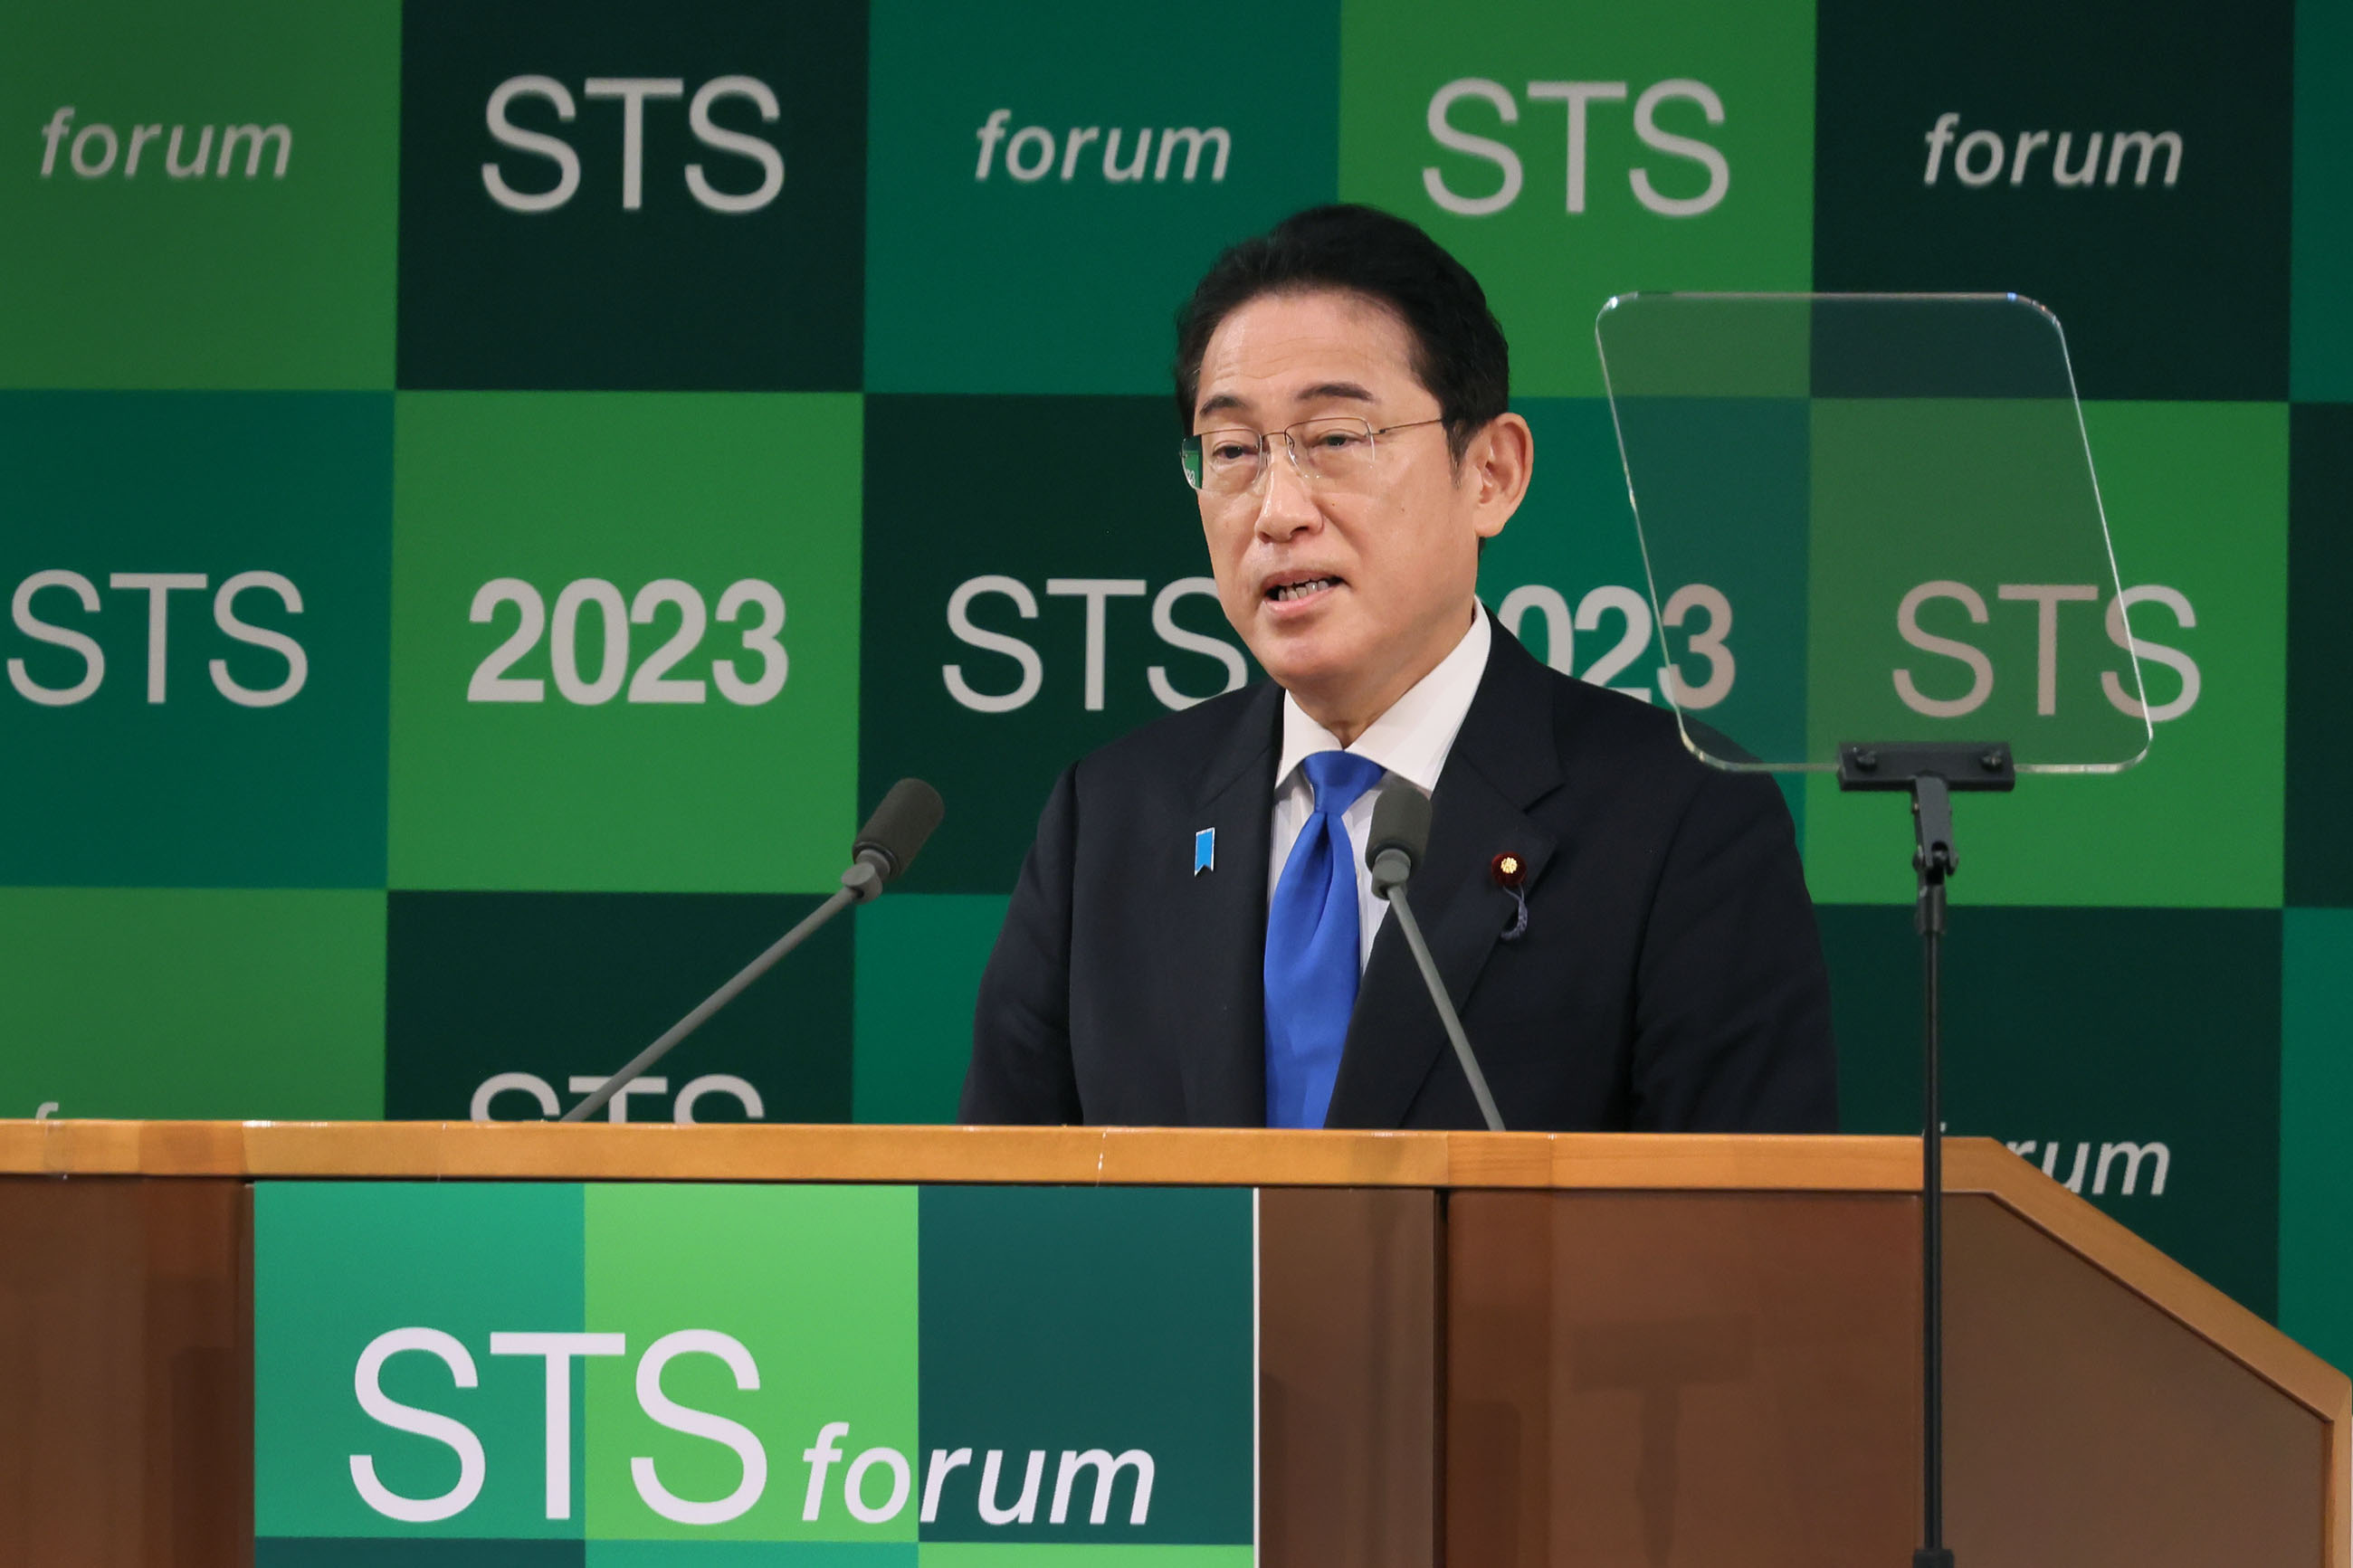 Prime Minister Kishida delivering an address at the opening ceremony (3)